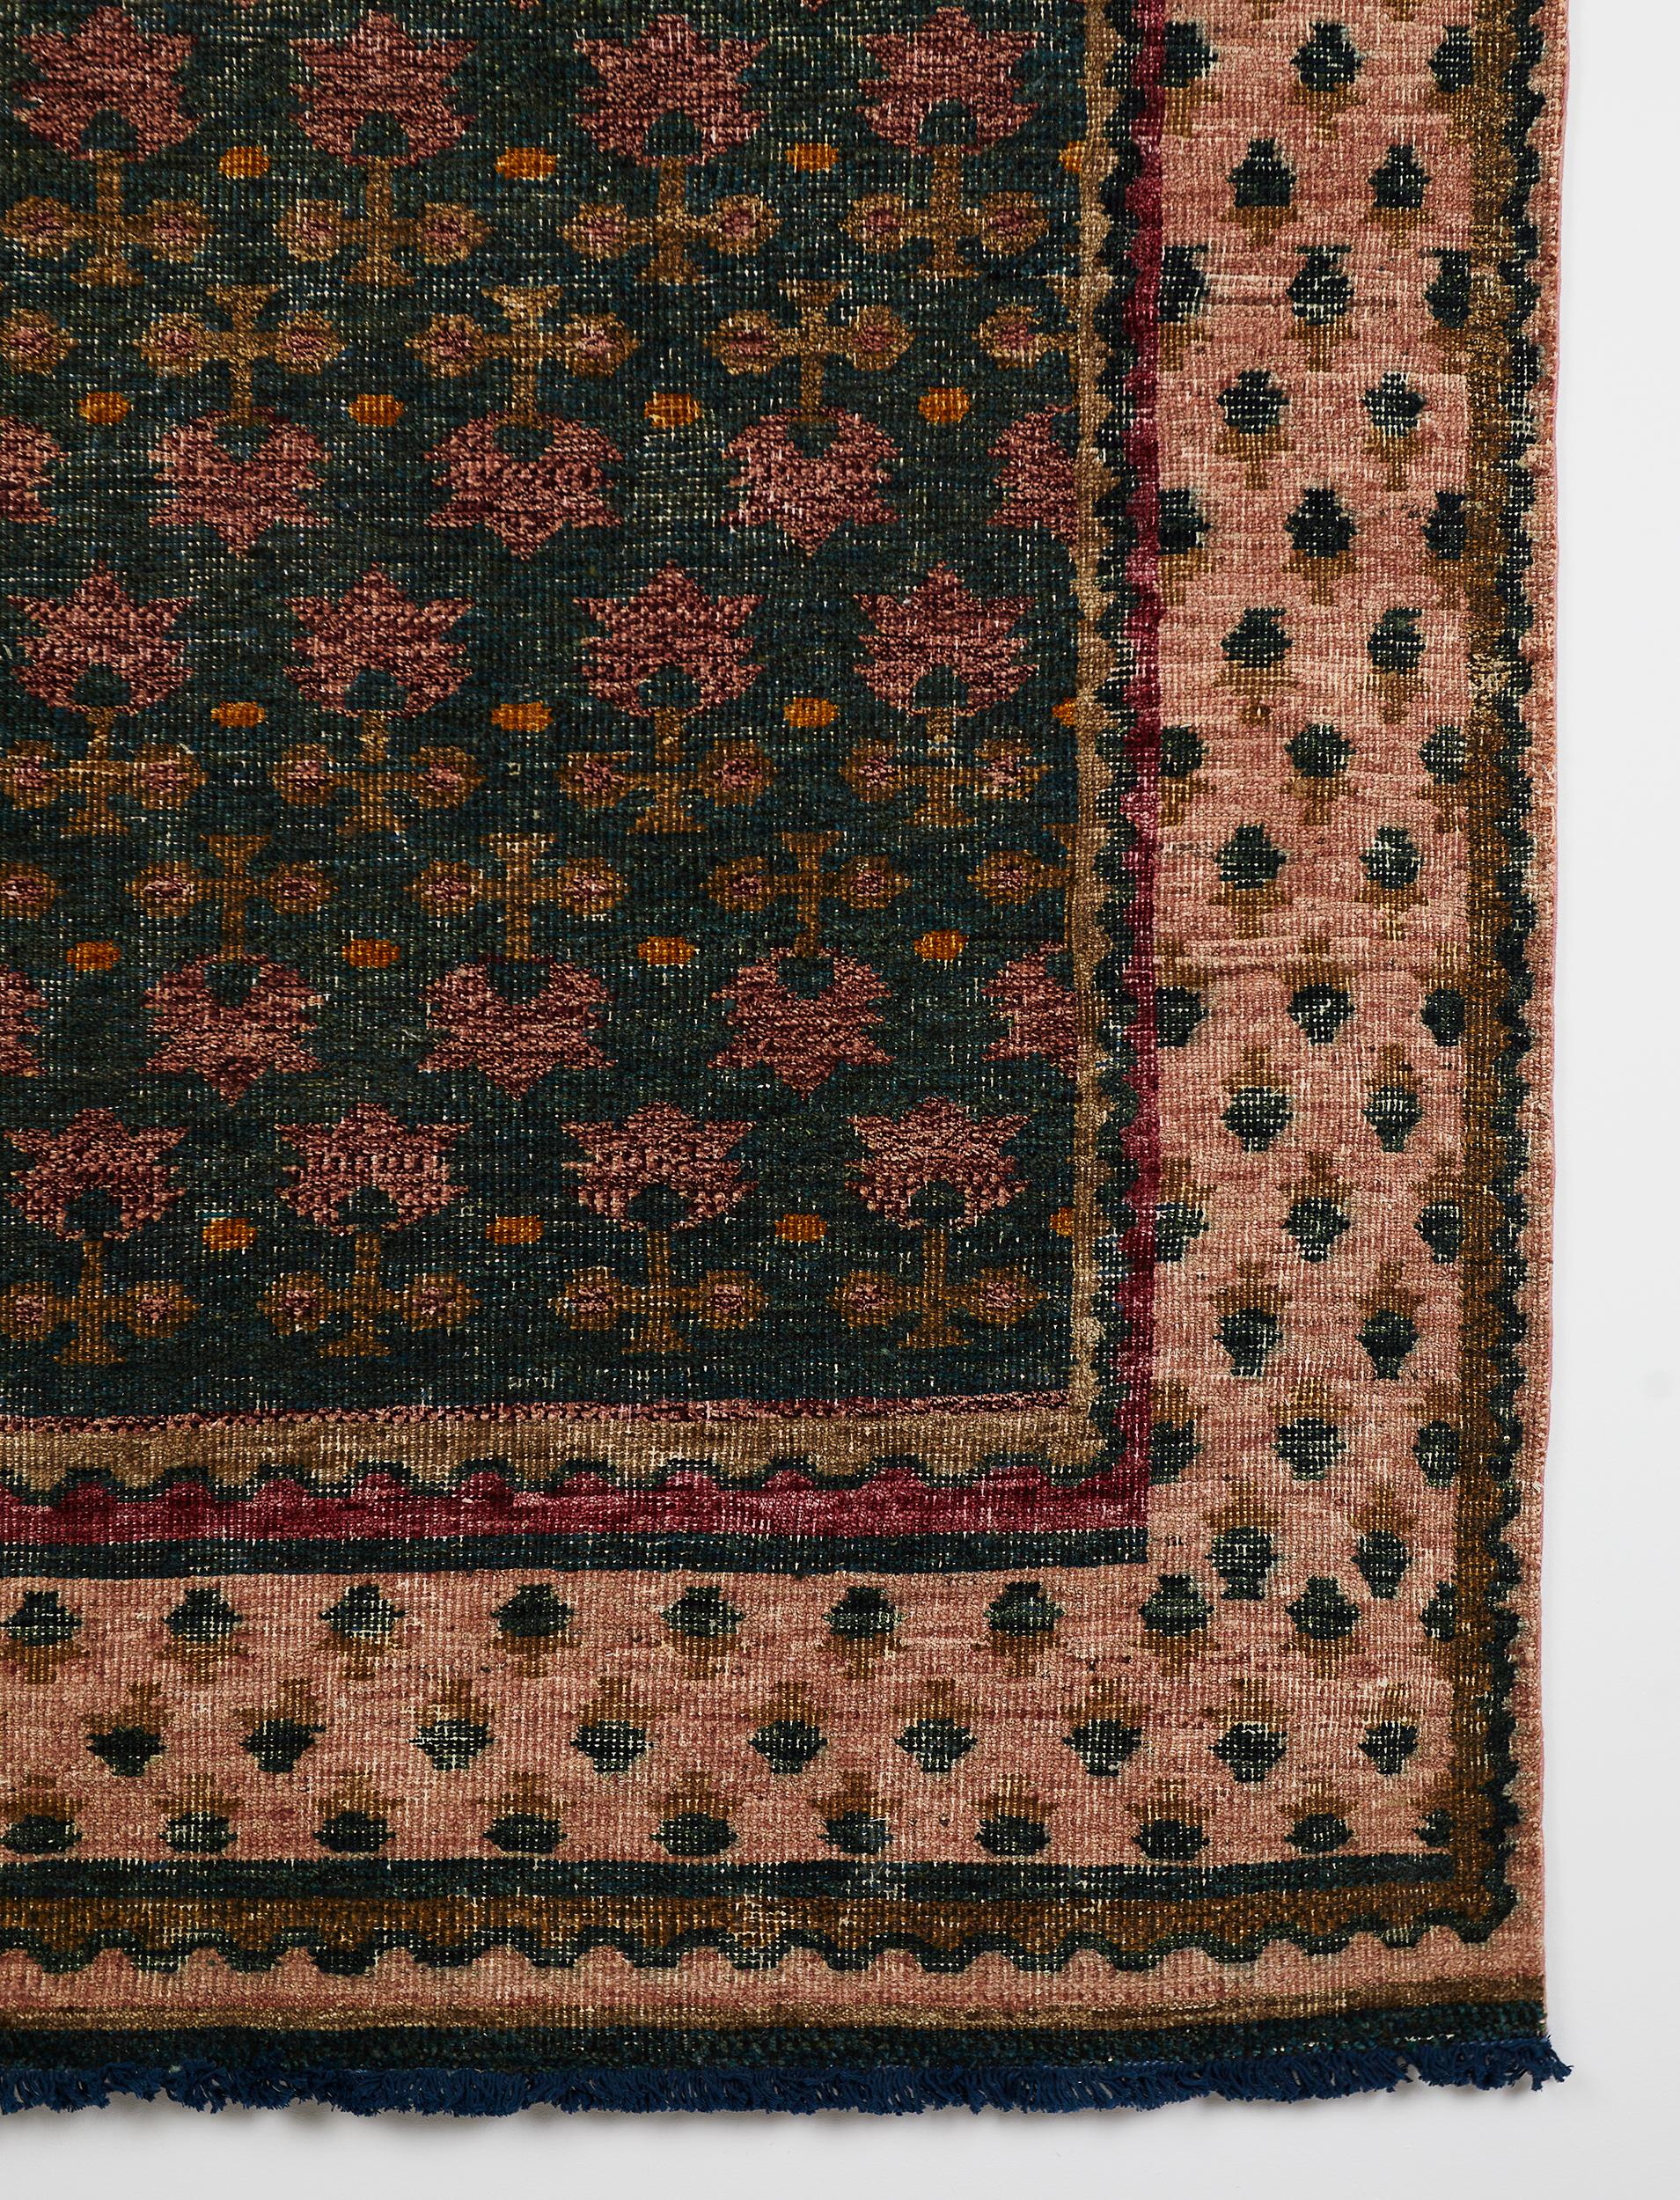 The Bergamot Rug

A hand-knotted, 100% Ghazni Wool rug.

Made in Pakistan.

It was in the fall when we first visited the site for our recent hotel project, Wildflower Farms. We were struck by the vast open fields surrounding the property and the